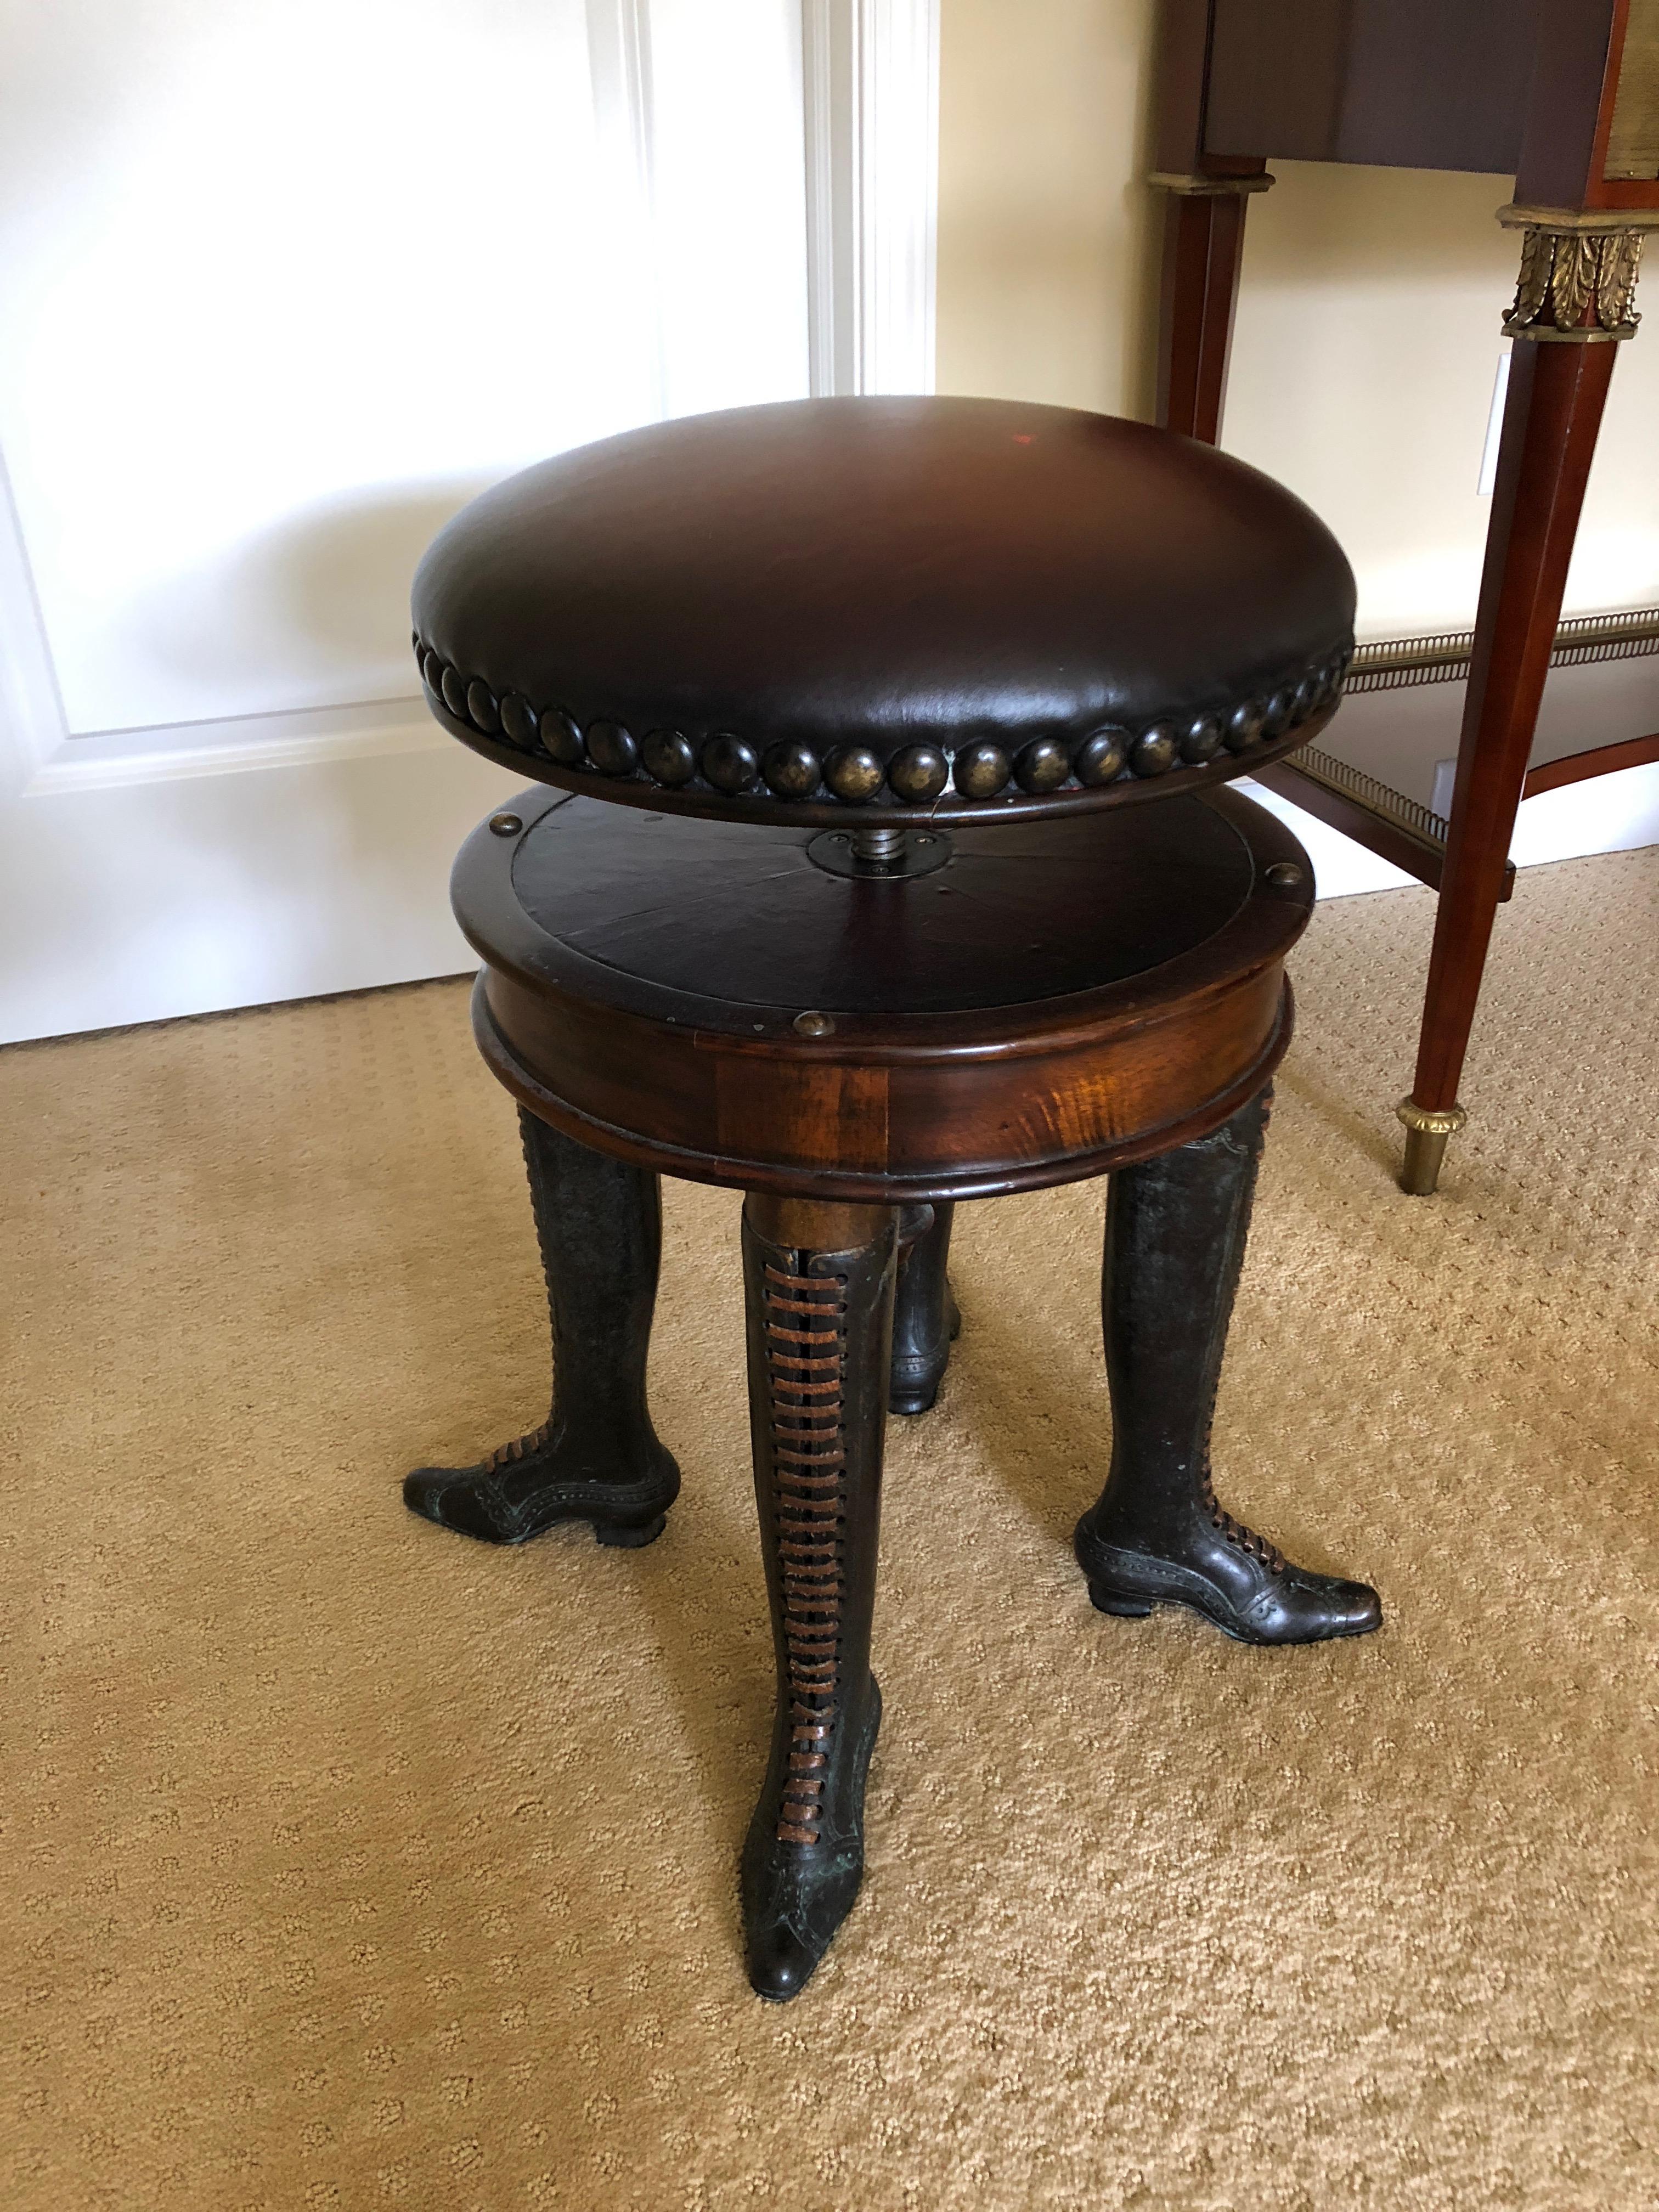 Late Victorian Wonderfully Whimsical Rotating Leather Top Stool with Bronze Lady's Boot Legs